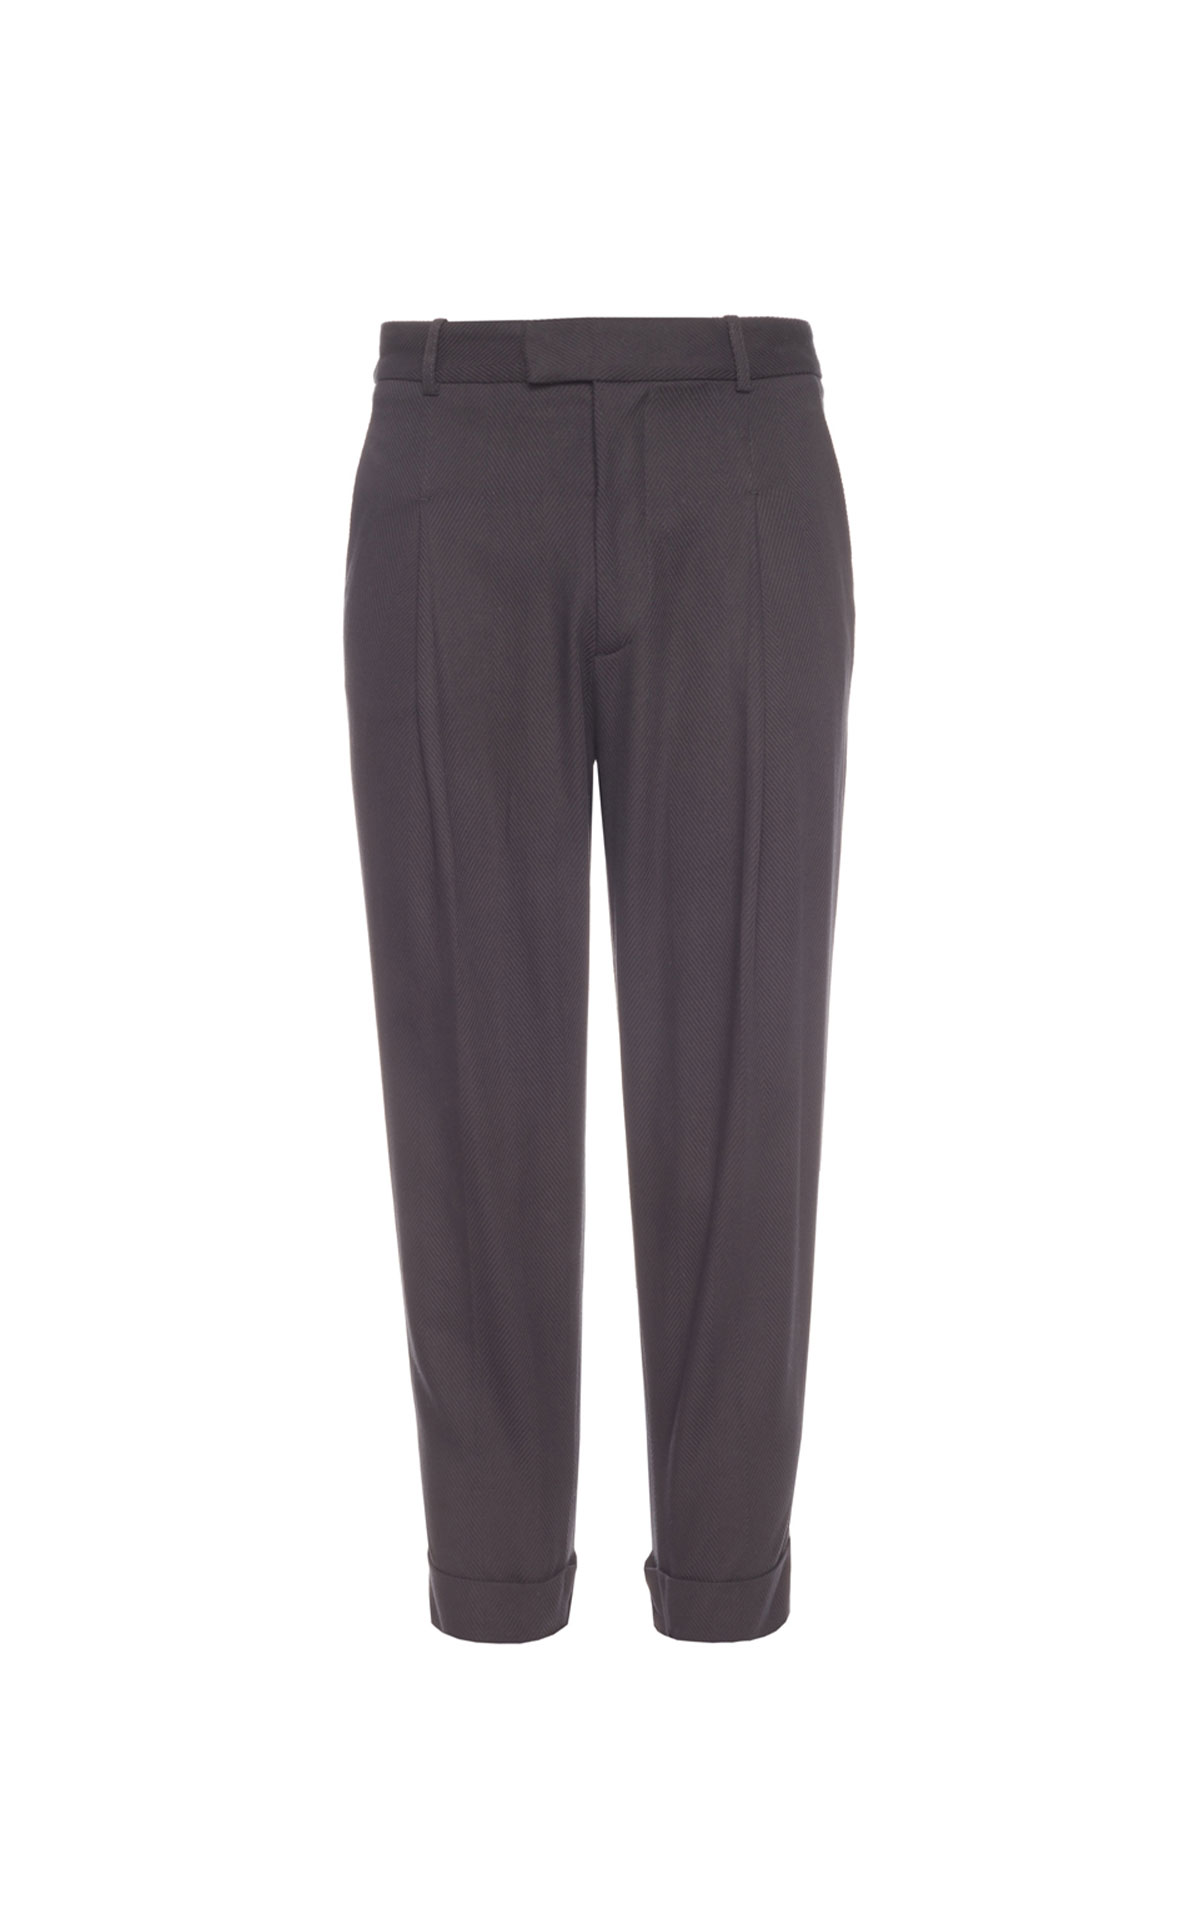 Golden Goose Cotton trouser from Bicester Village